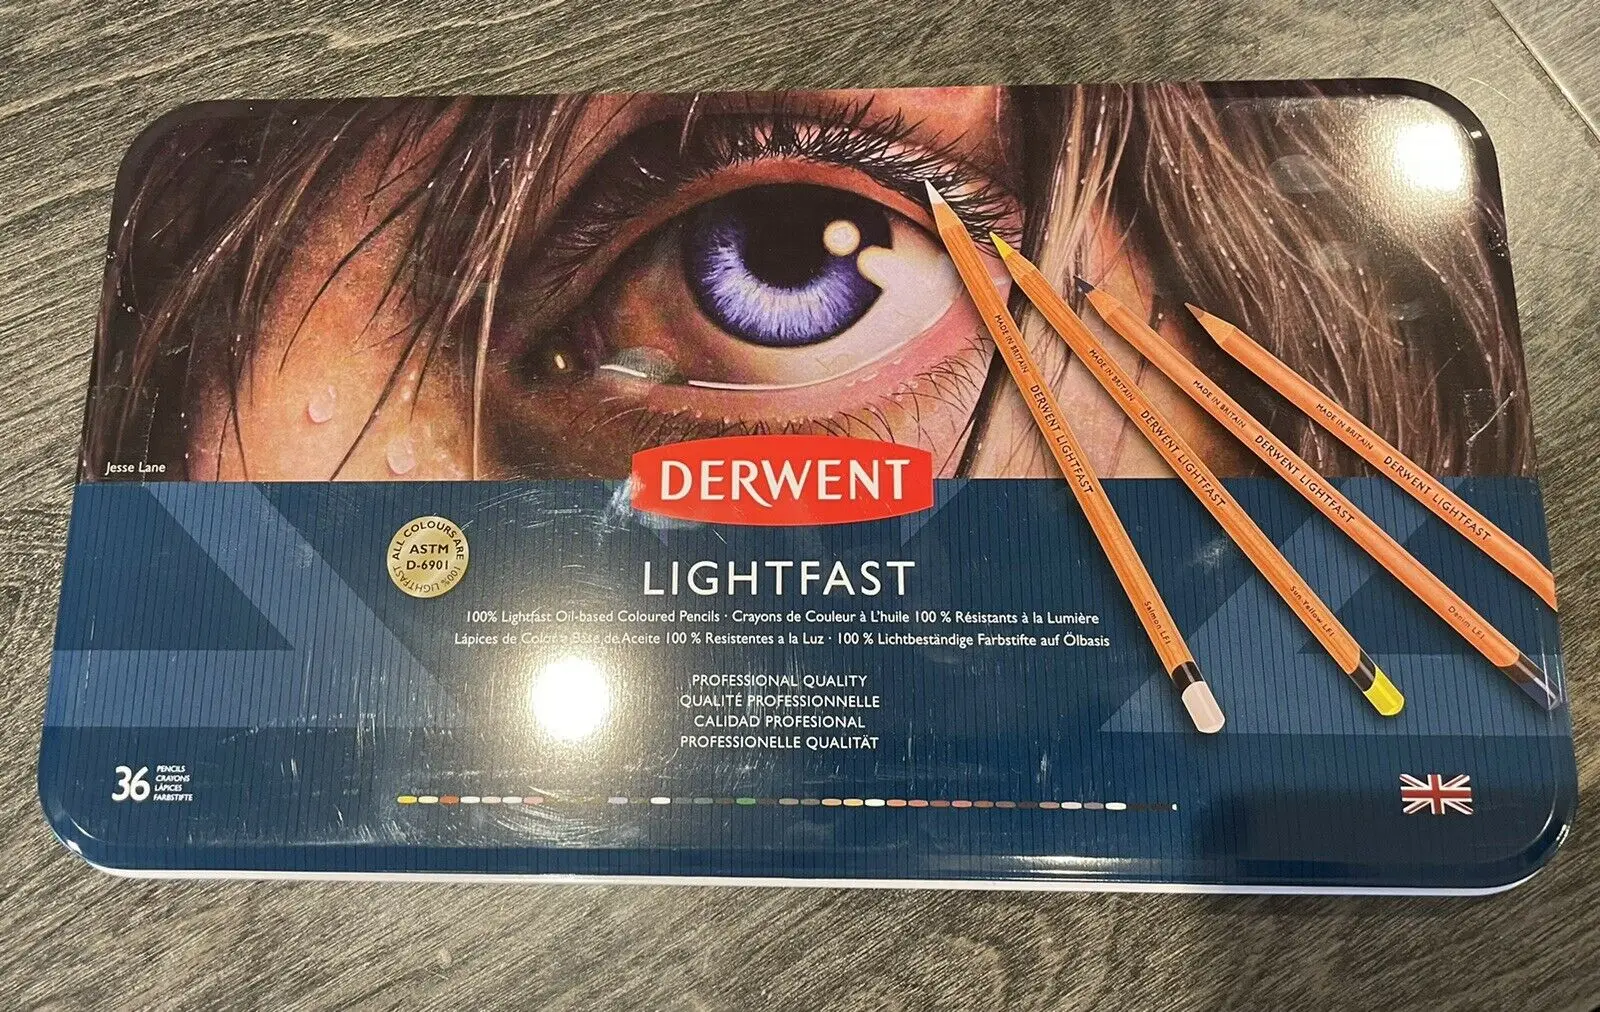 New Derwent Lightfast Colored Pencils 24 72 100 Colors, Oil-based 4mm Wide  Core, 100% Lightfast, No Fade for 100 Years